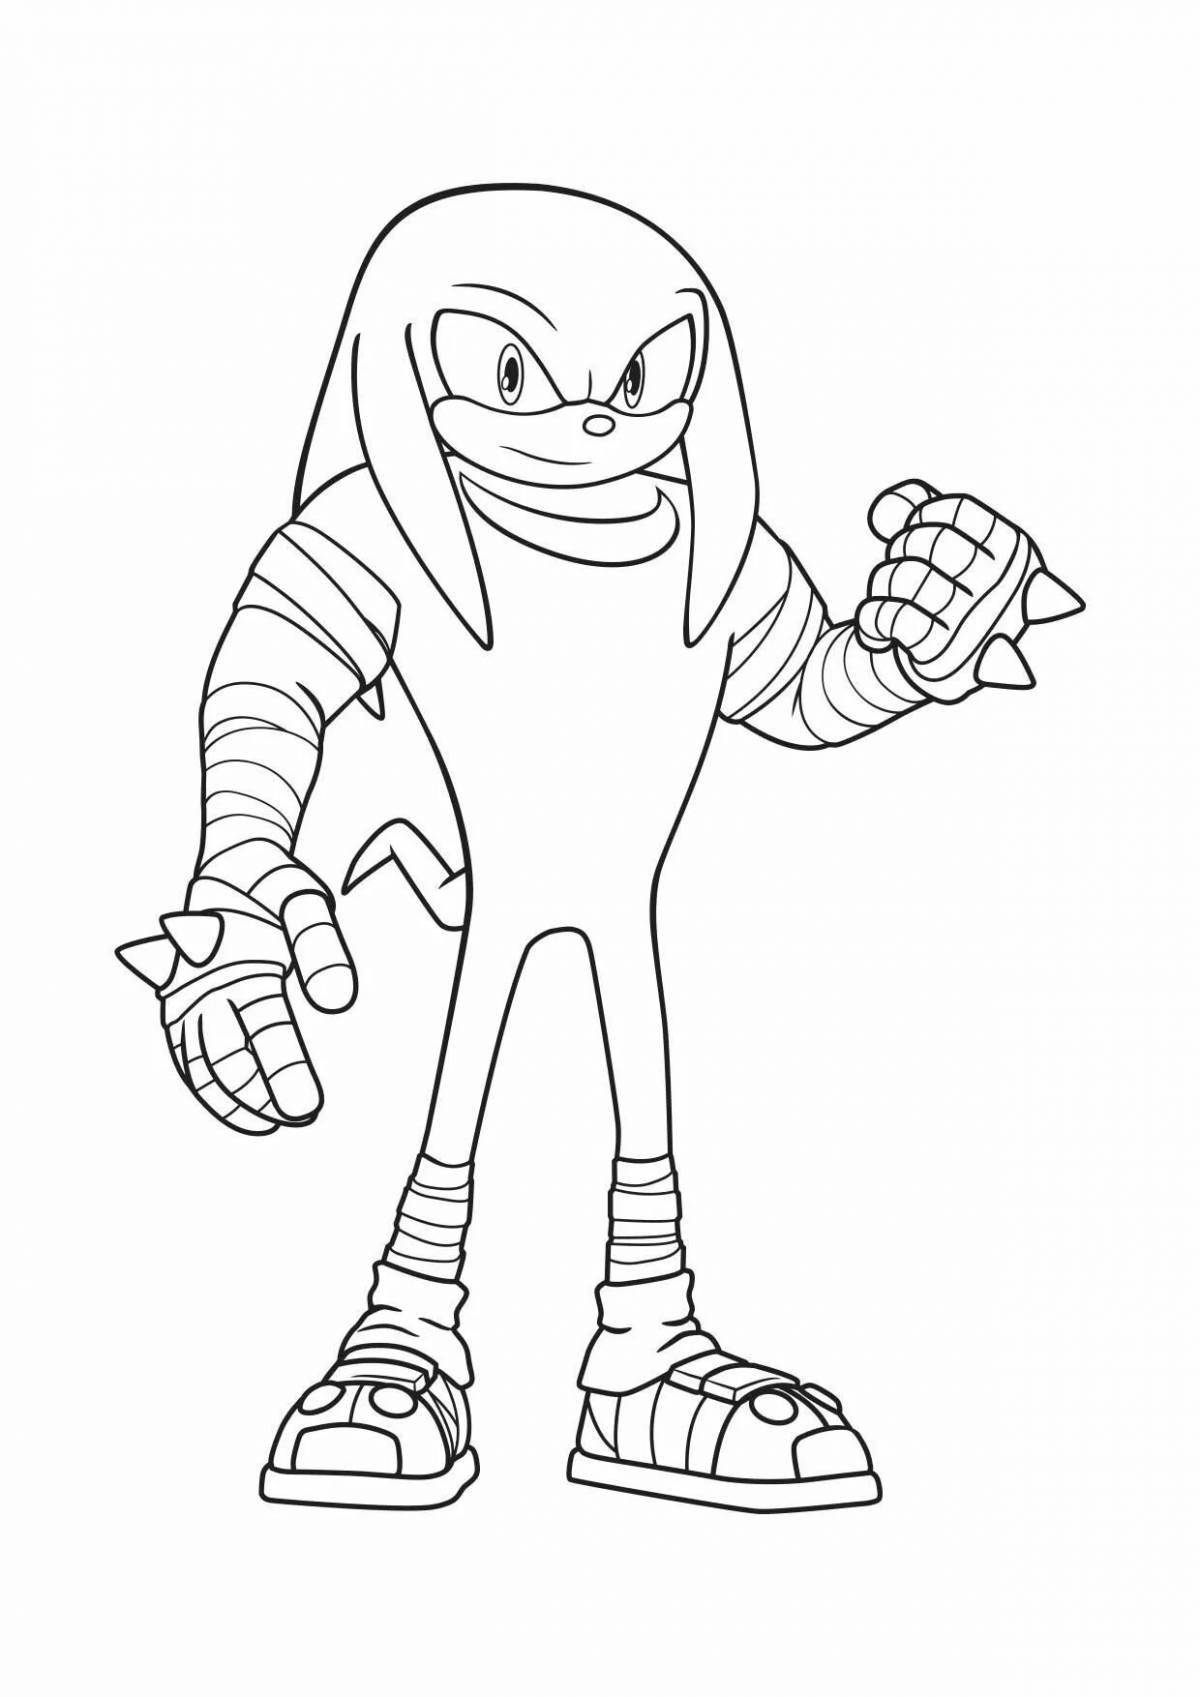 Coloring book delightful echidna knuckles